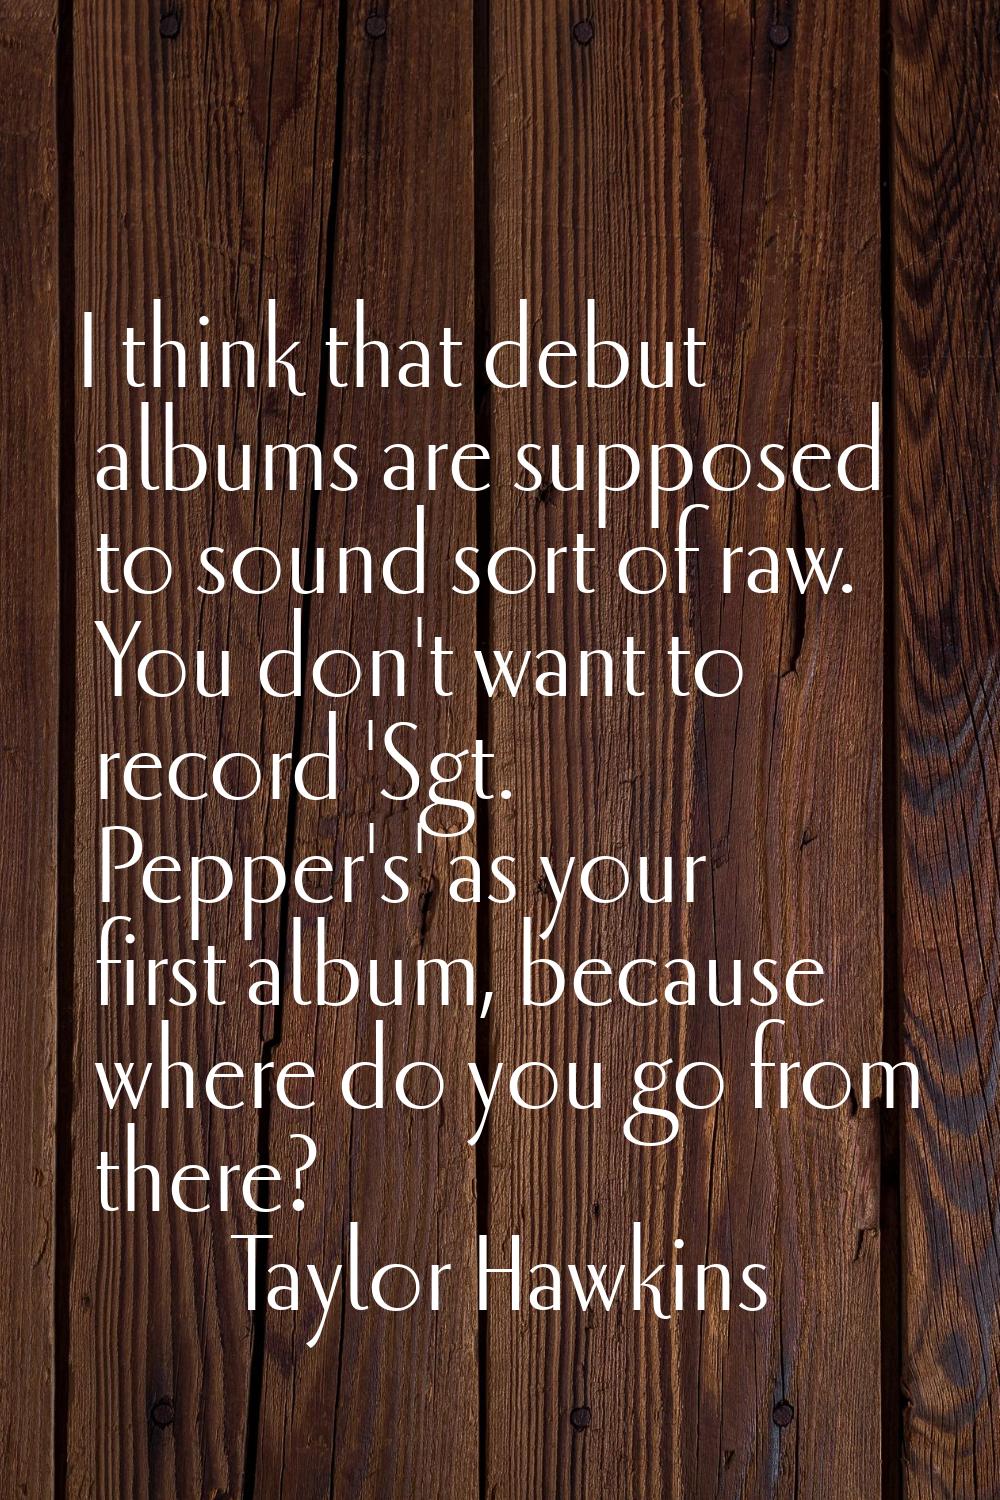 I think that debut albums are supposed to sound sort of raw. You don't want to record 'Sgt. Pepper'